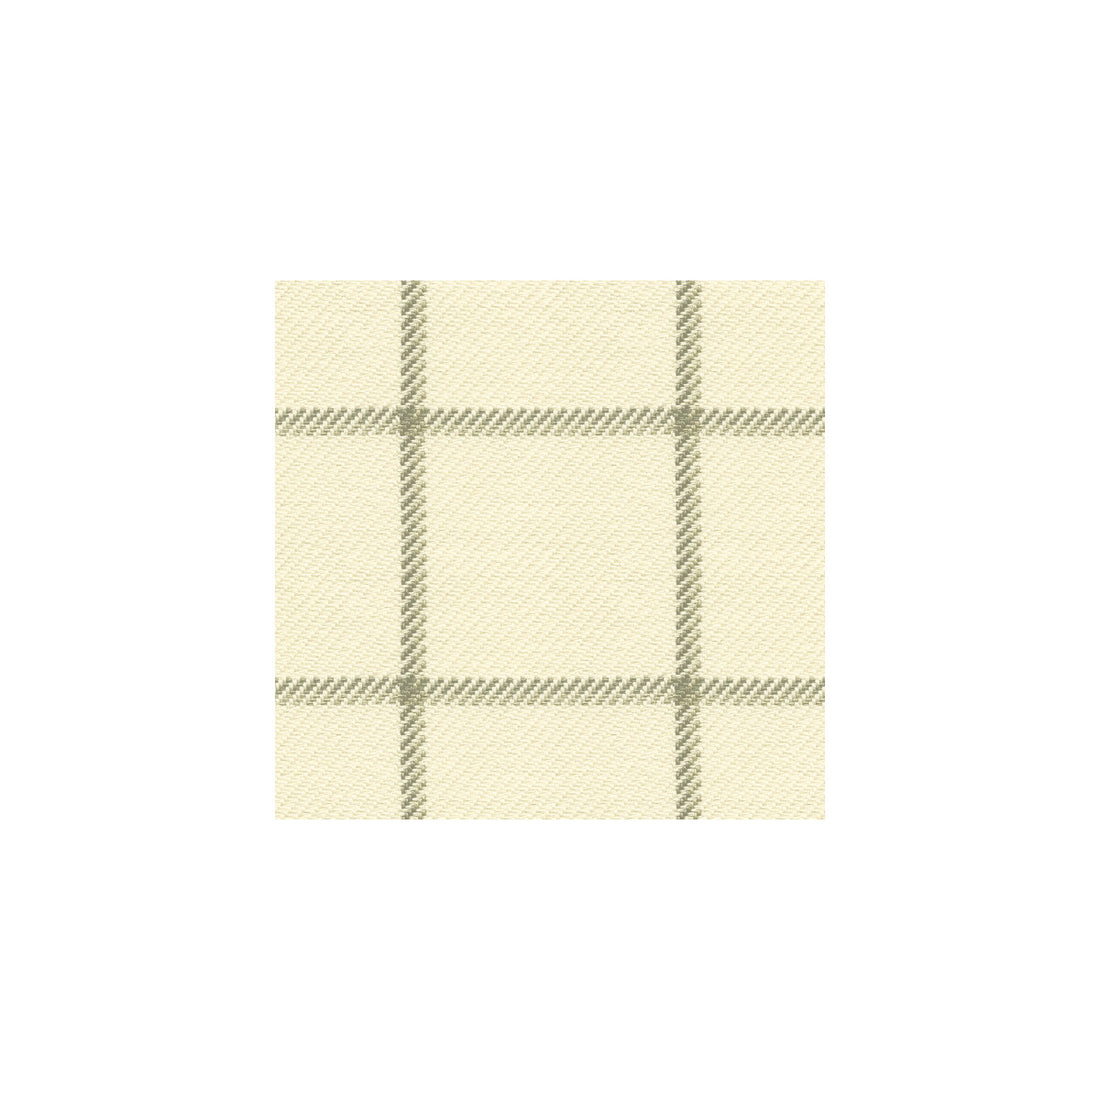 Harbord fabric in linen color - pattern 32994.11.0 - by Kravet Basics in the Sarah Richardson Affinity collection